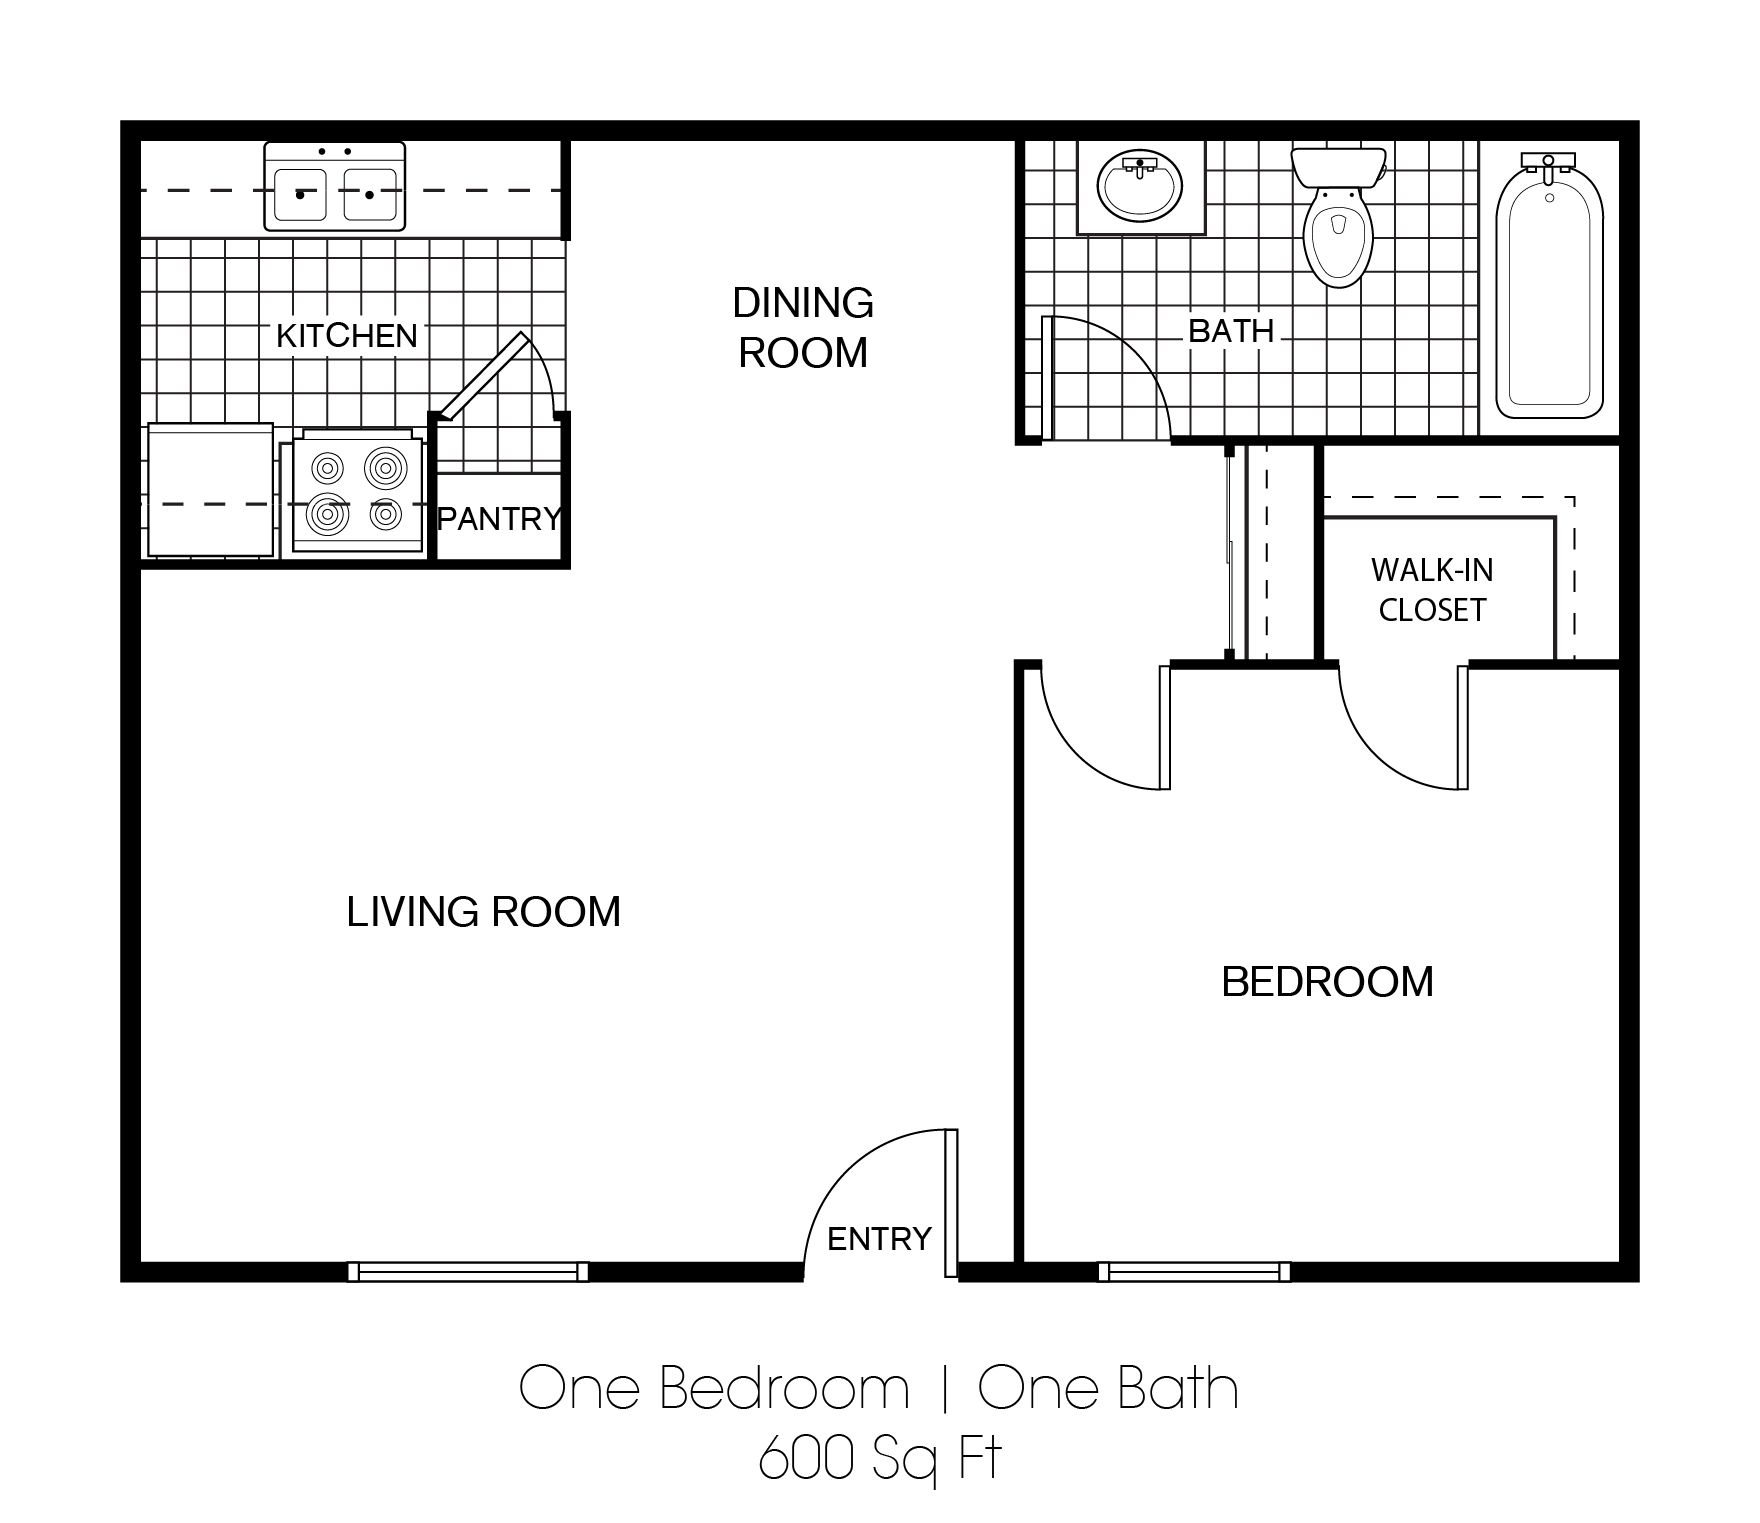 A A1 unit with 1 Bedrooms and 1 Bathrooms with area of 600 sq. ft